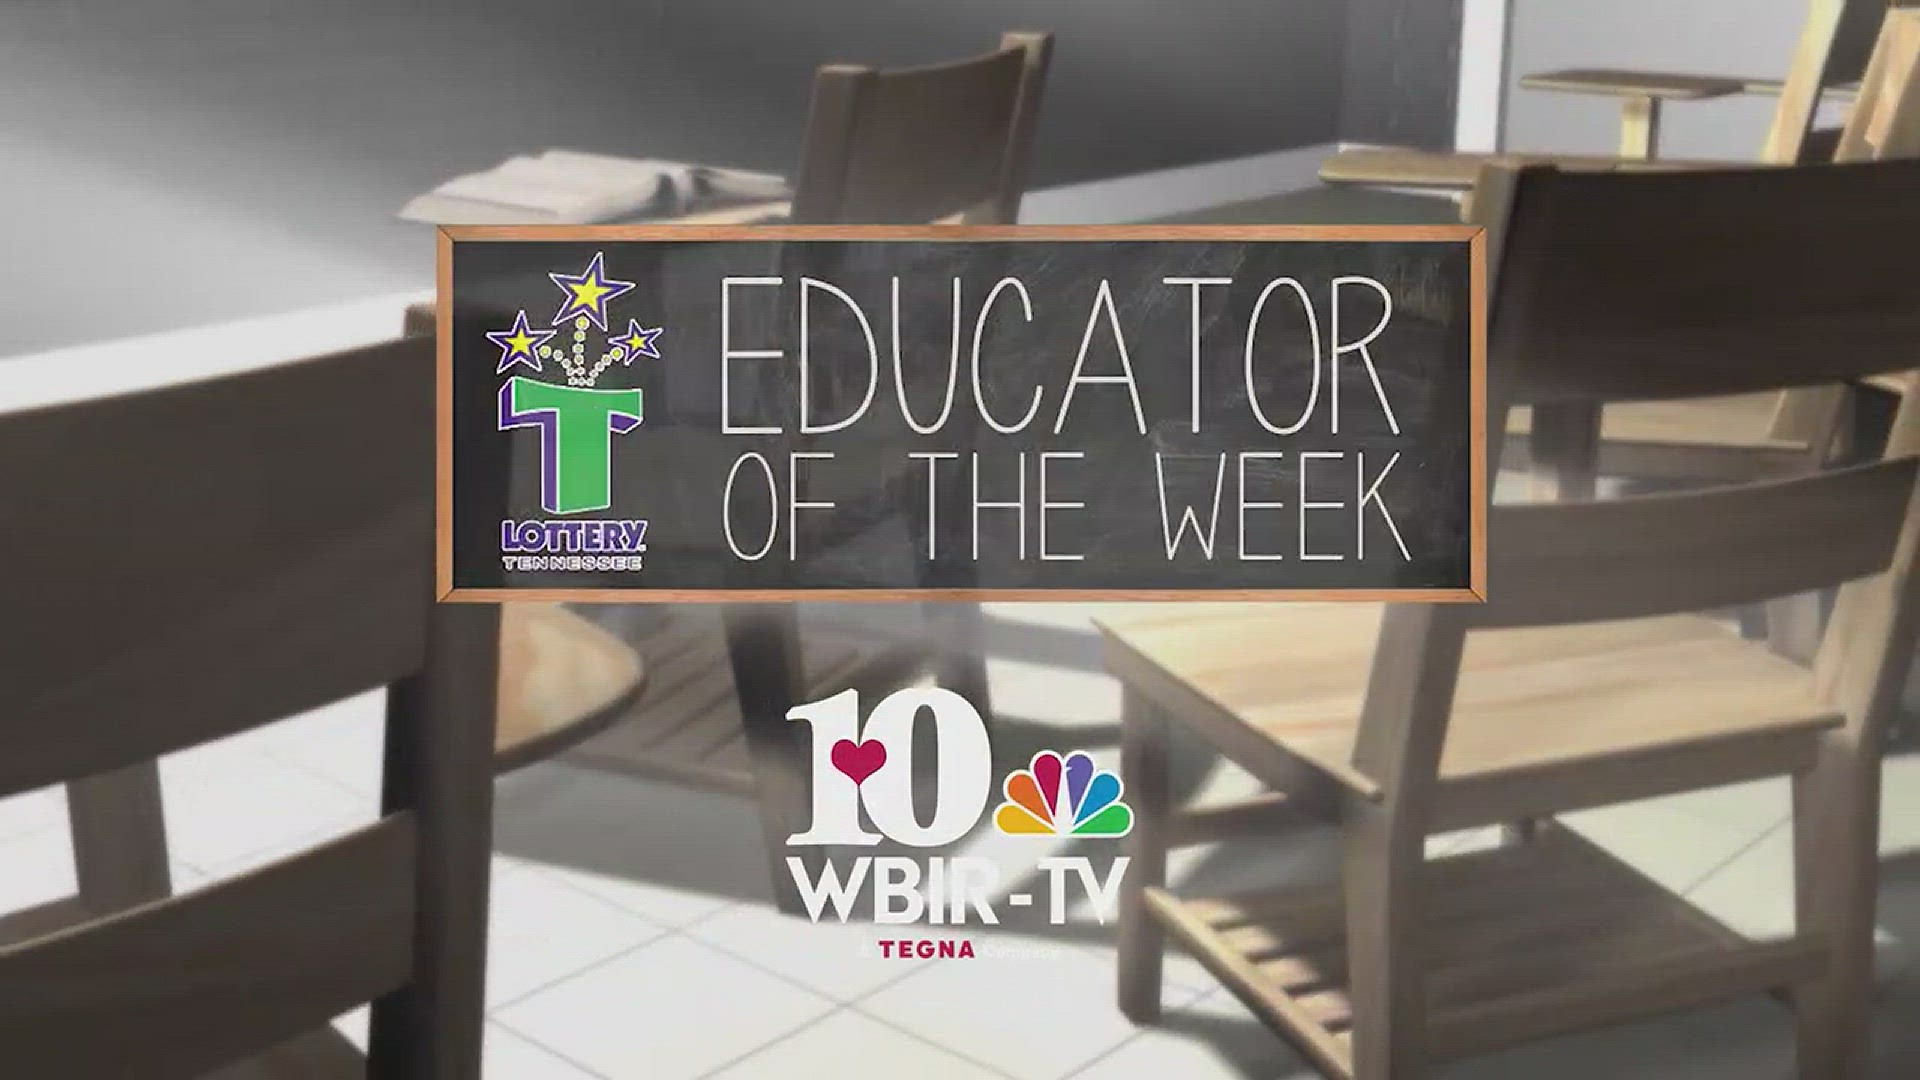 The educator of the week 11/27 is Adrian Rogers